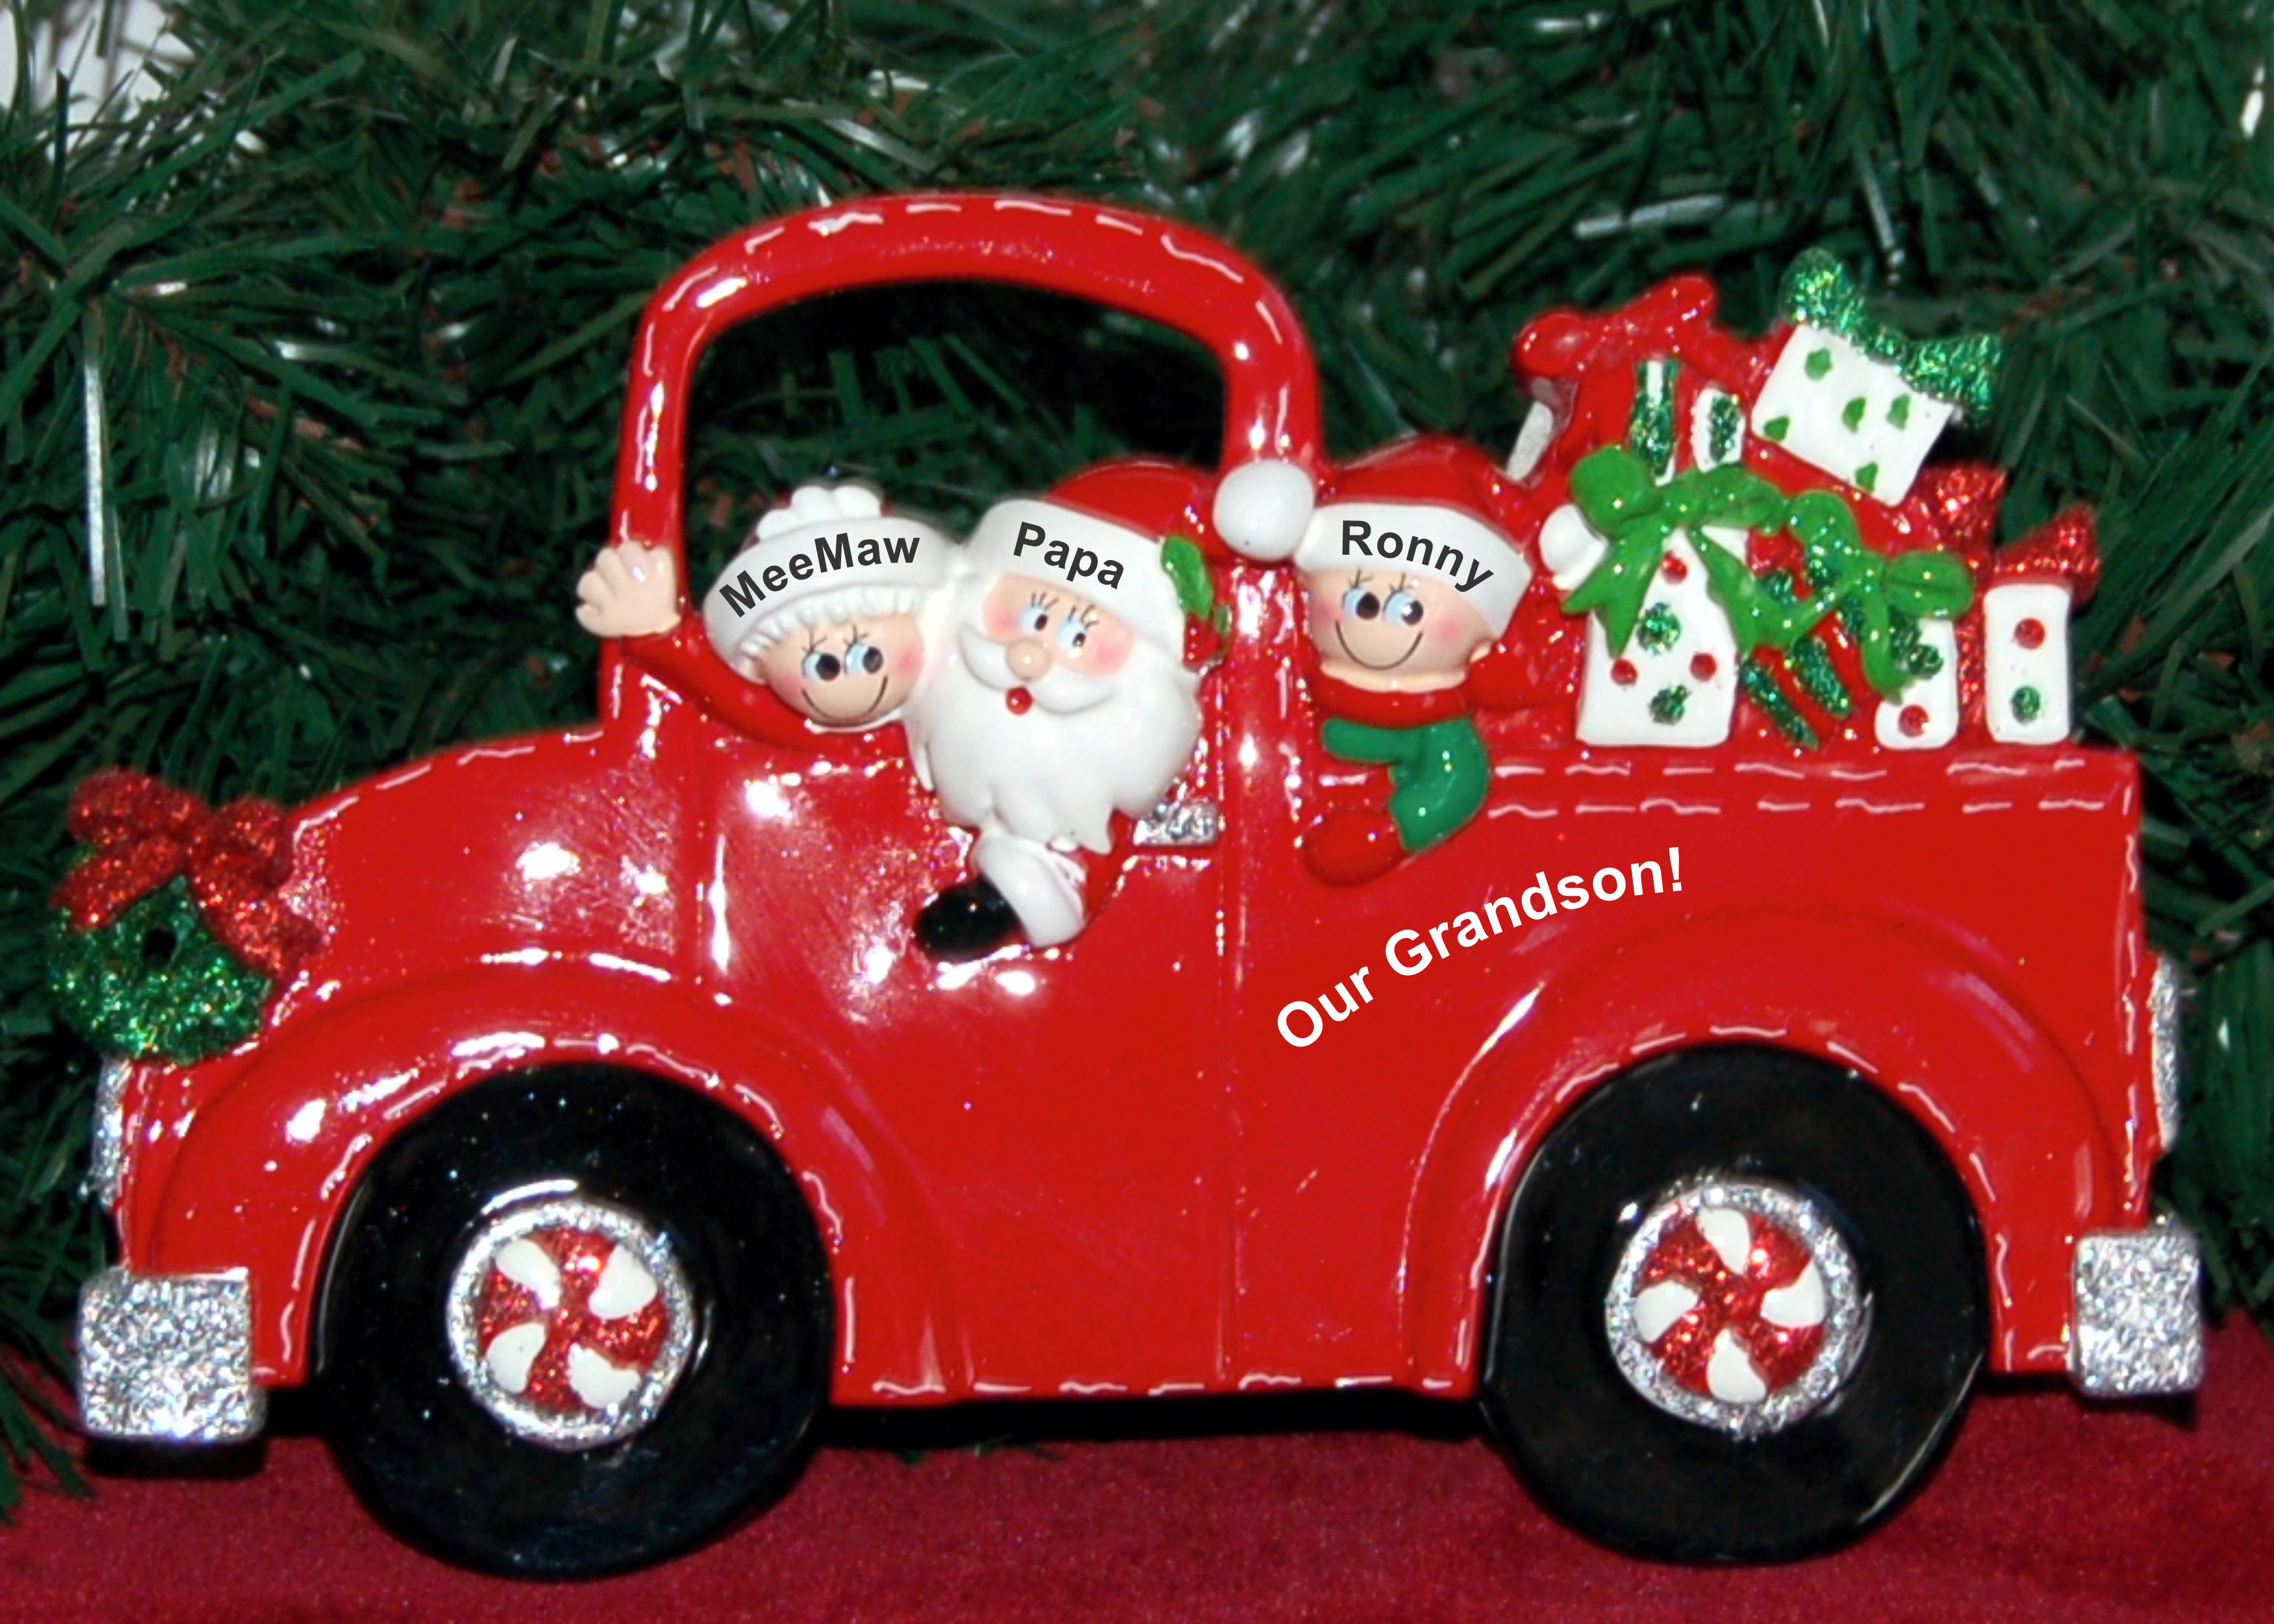 Tabletop Christmas Decoration Fire Engine Our Granddaughter Personalized by RussellRhodes.com